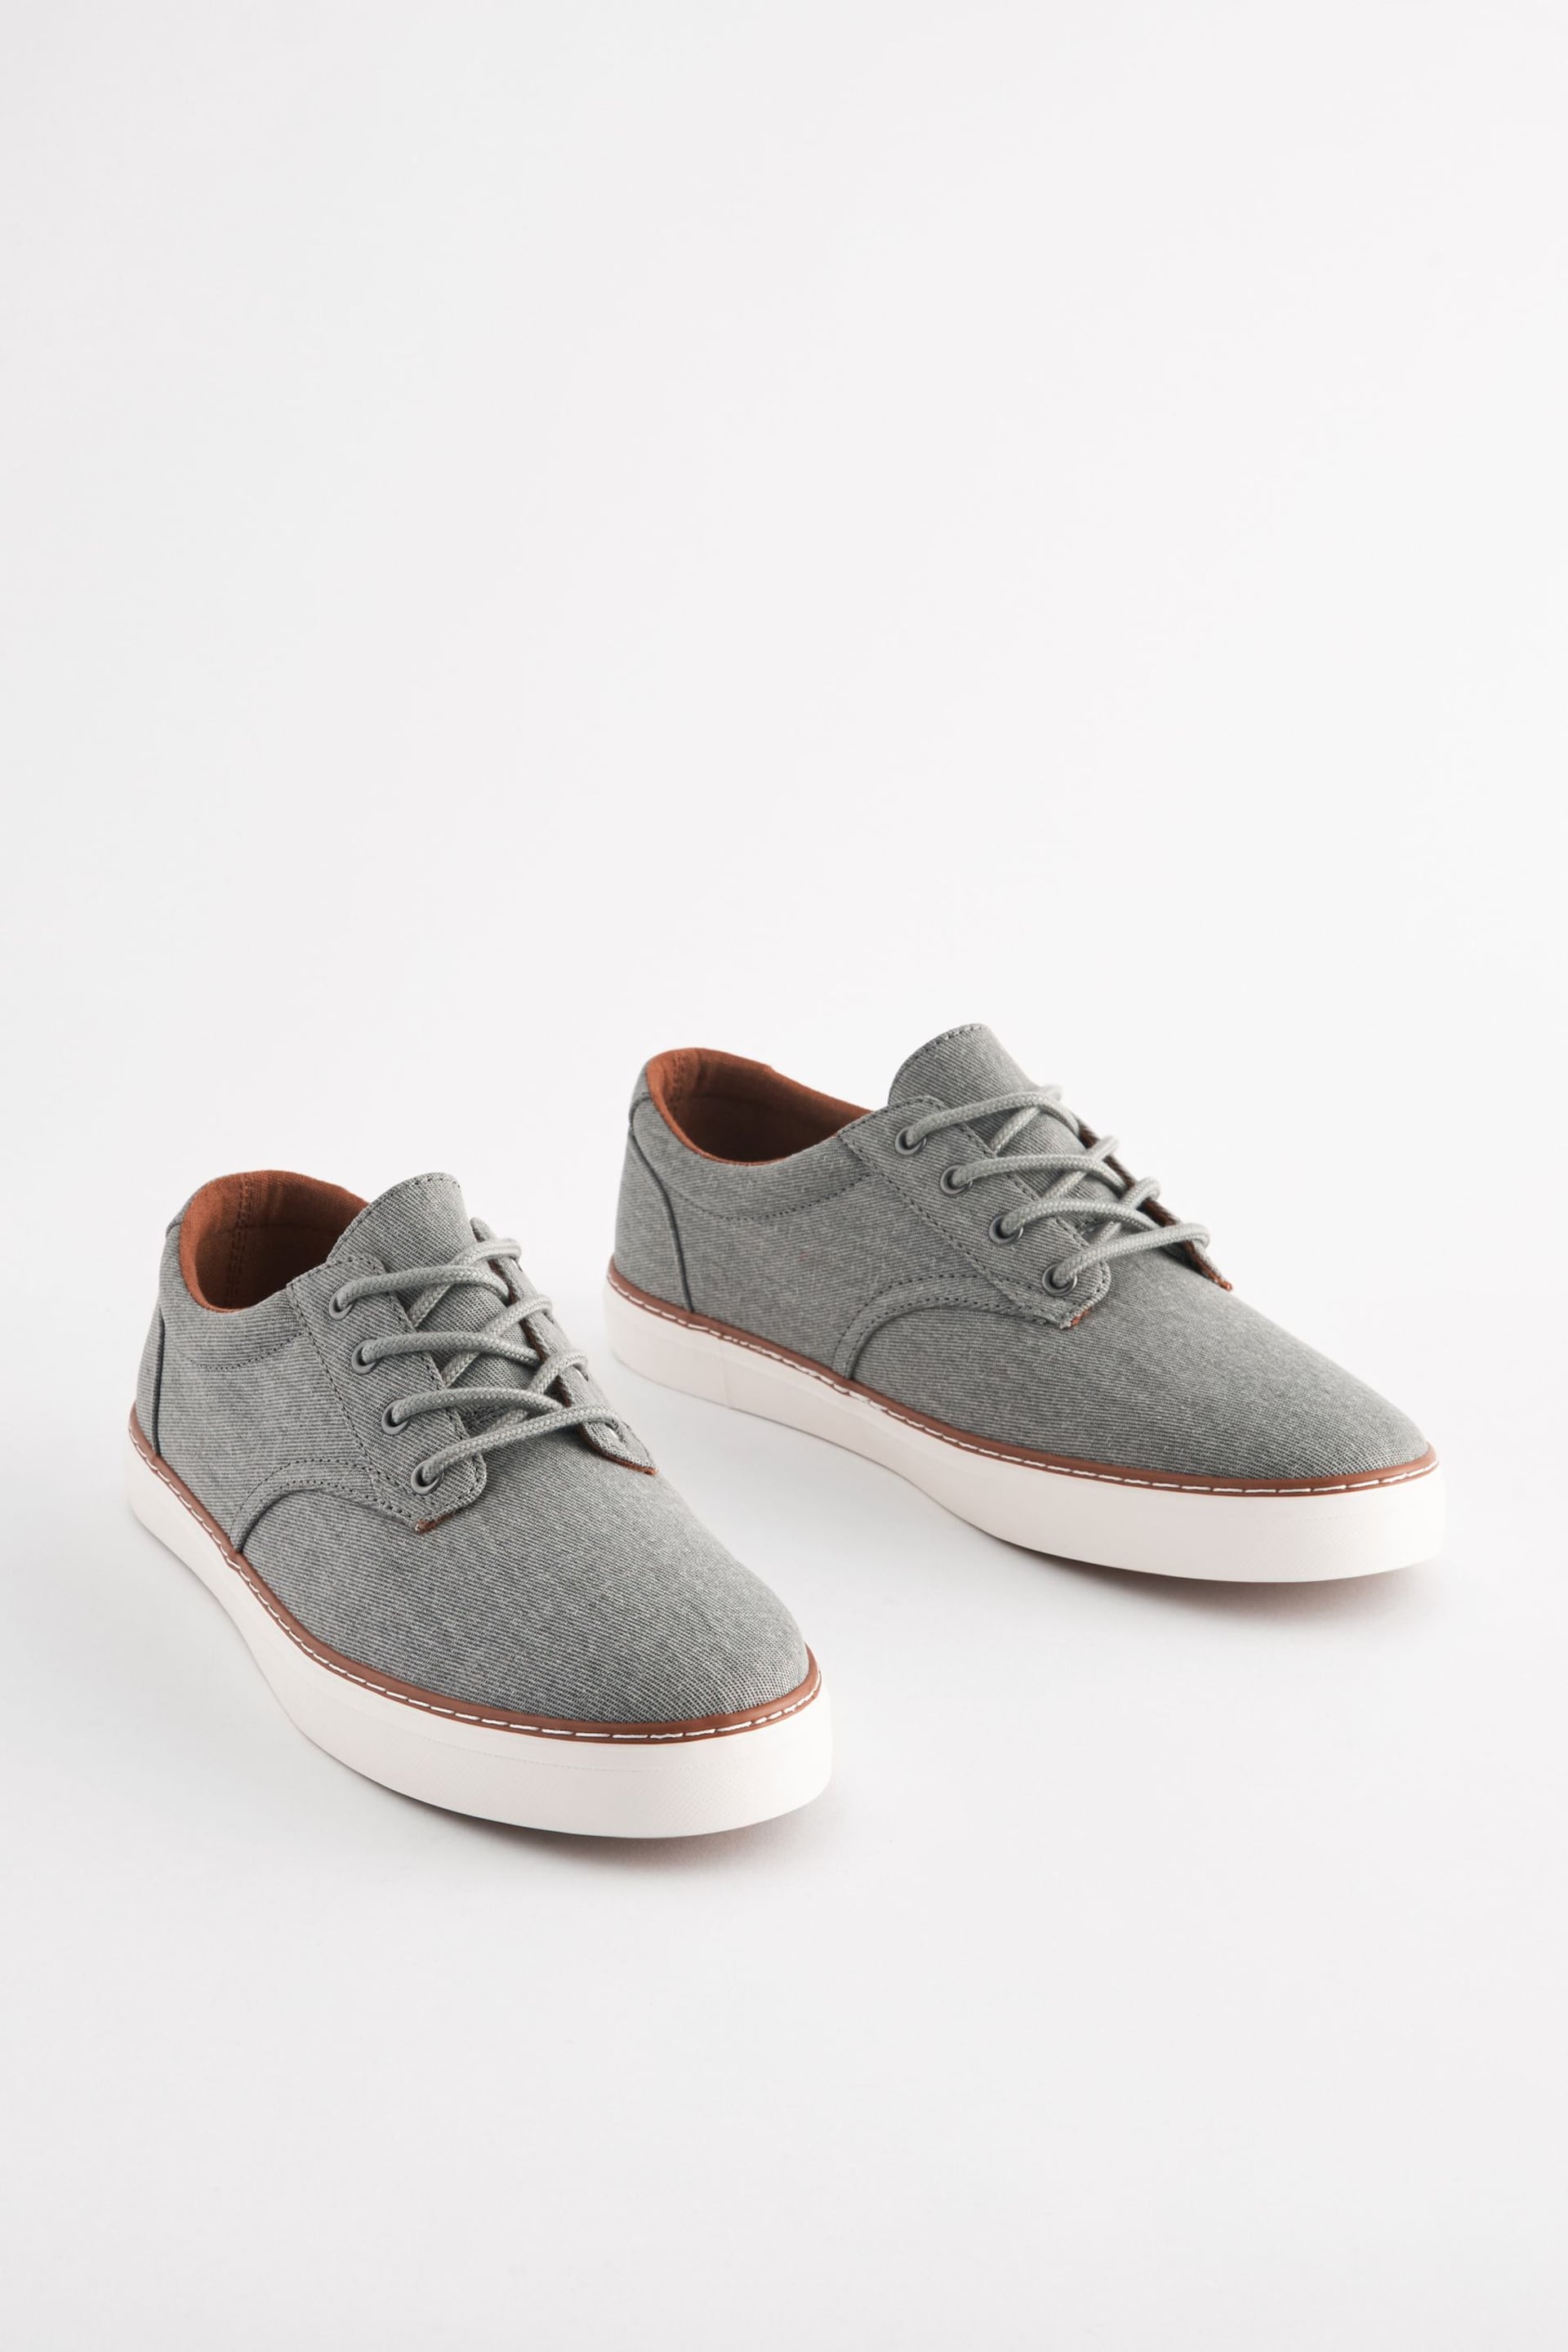 Grey Canvas Derby Trainers - Image 1 of 6